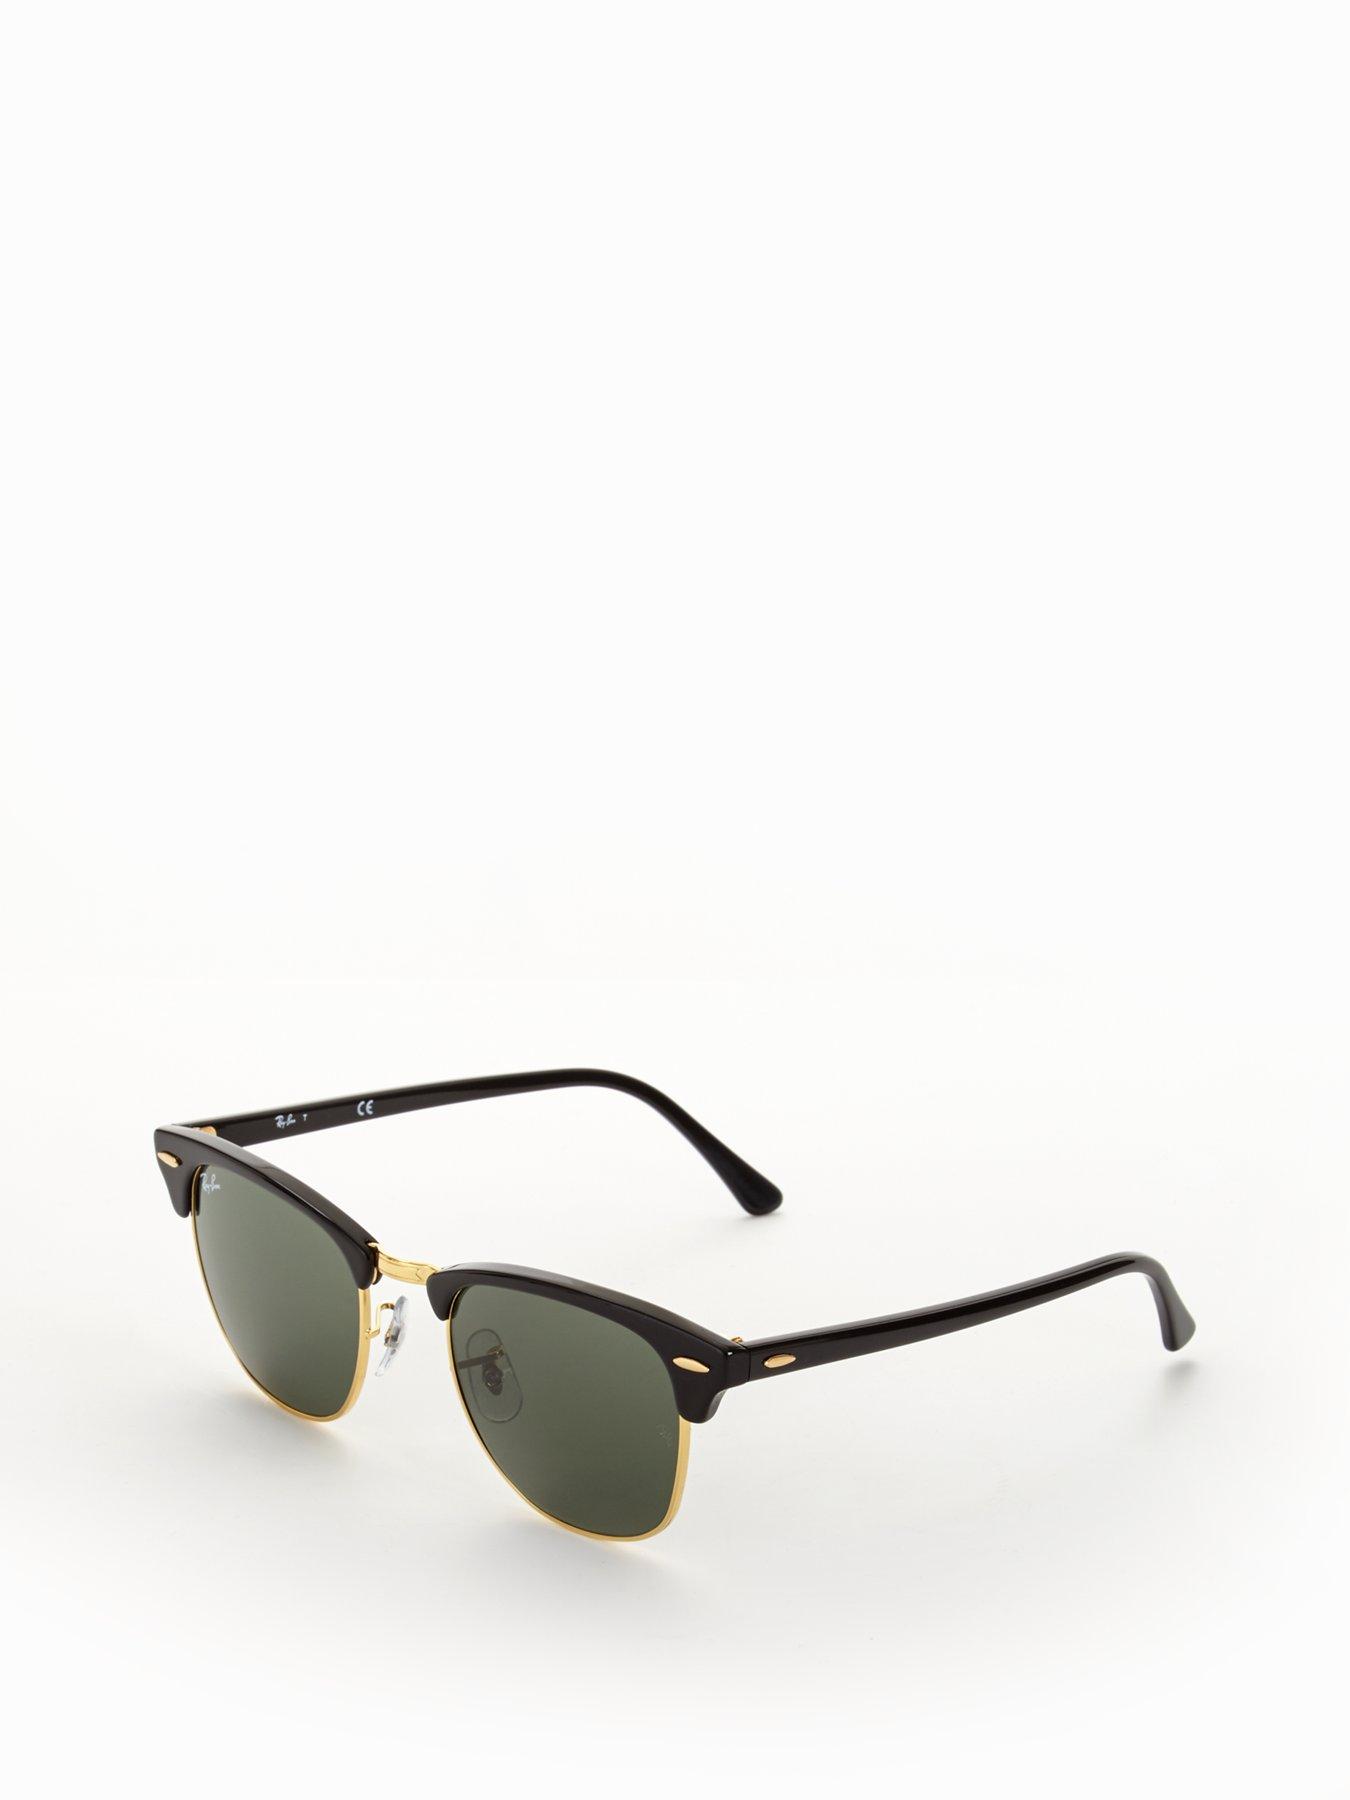 Ray-Ban Clubmaster Sunglasses - Black | littlewoods.com